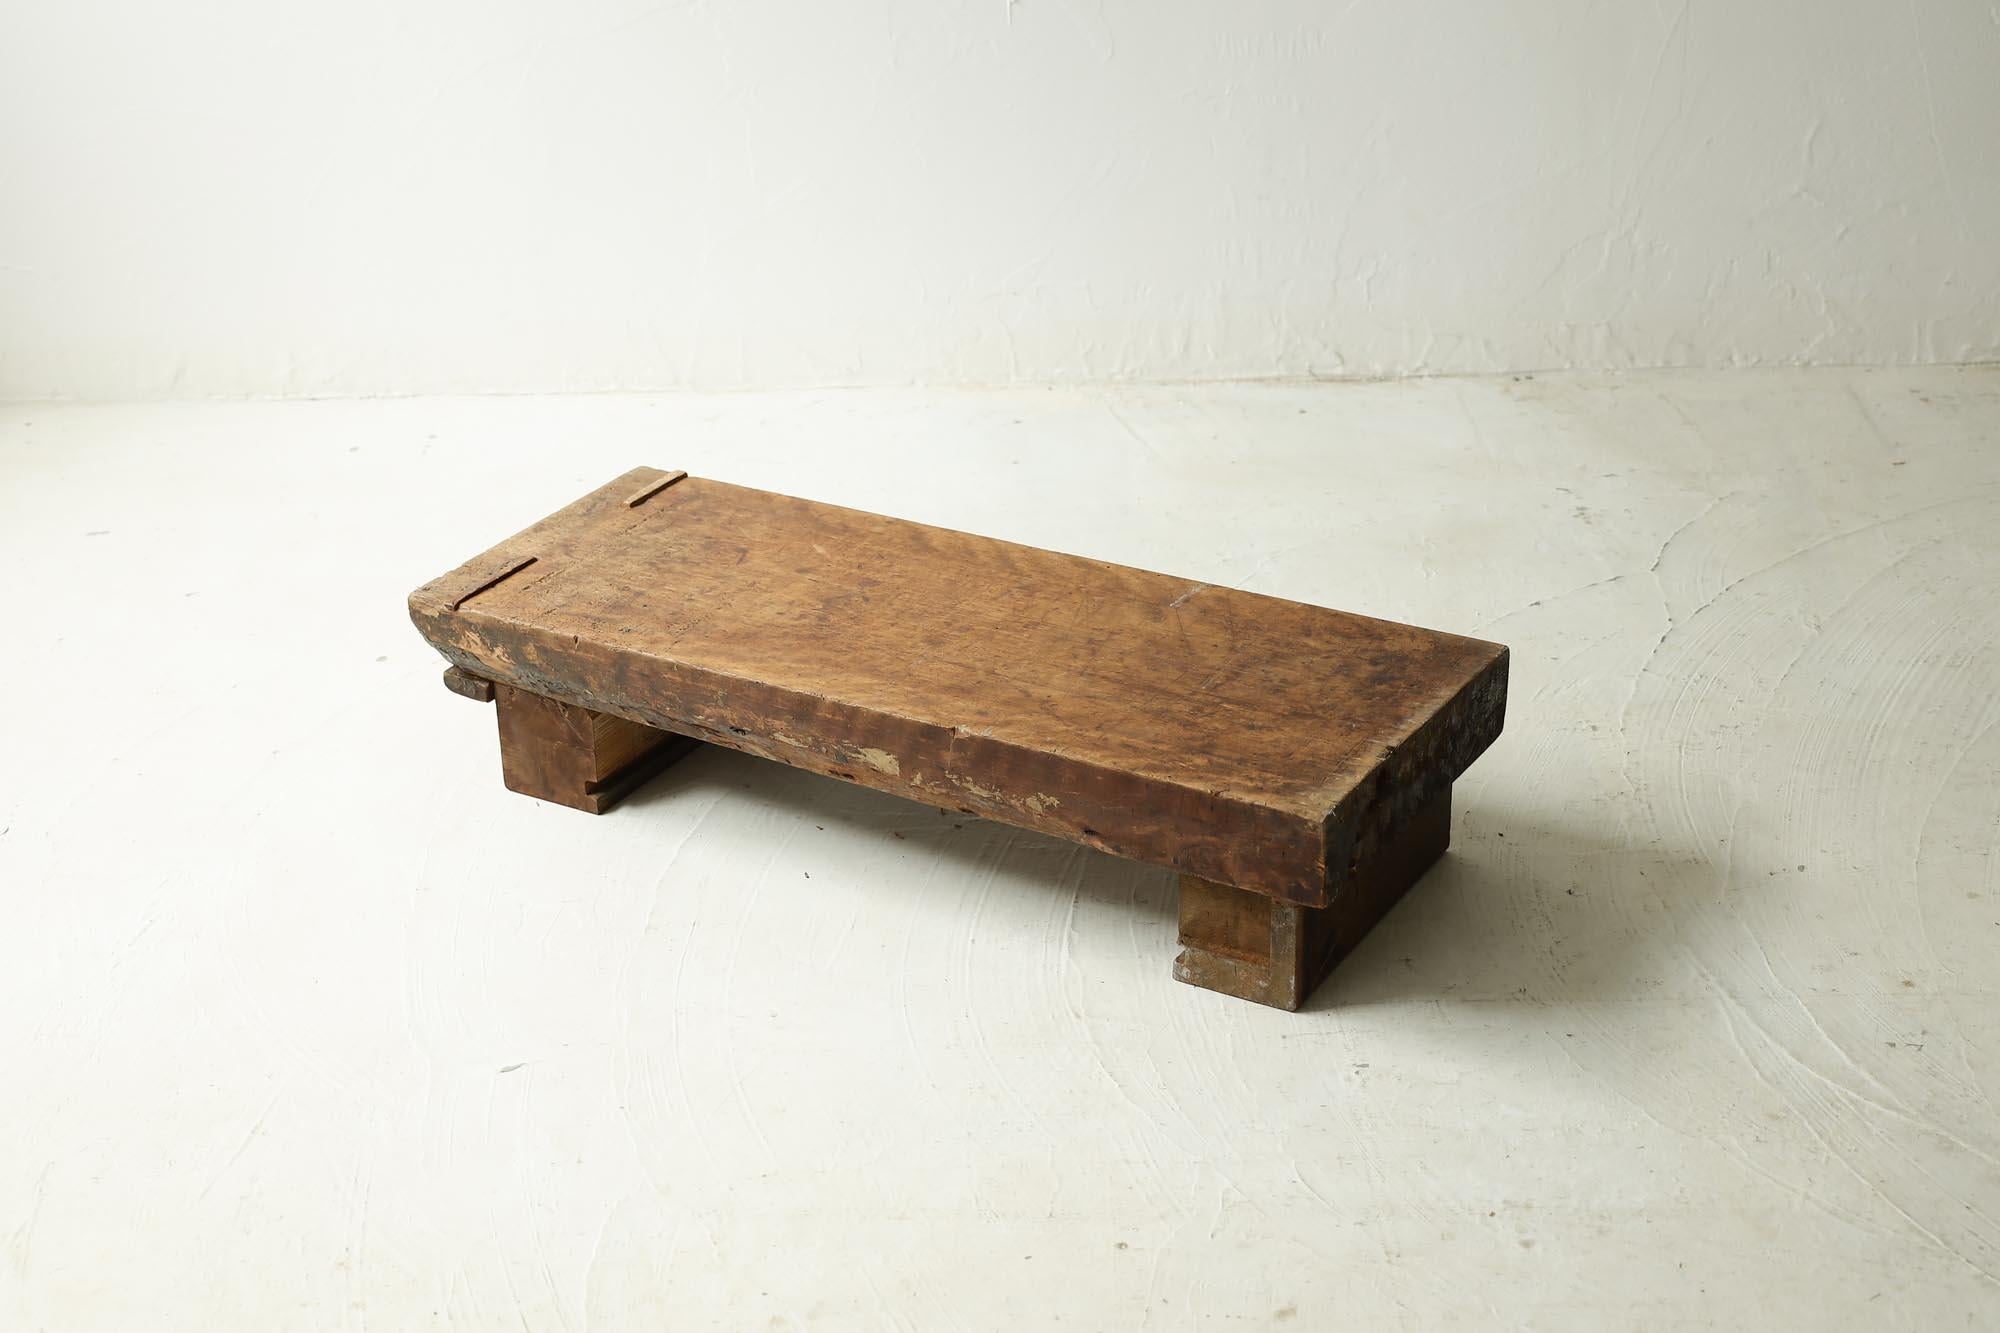 This is a wooden antique low table from the Meiji era.
It was used as a working table for woodworkers at that time.

It is made of high-grade Japanese zelkova wood.
The grain of the zelkova wood is very beautiful.

It has a beautiful